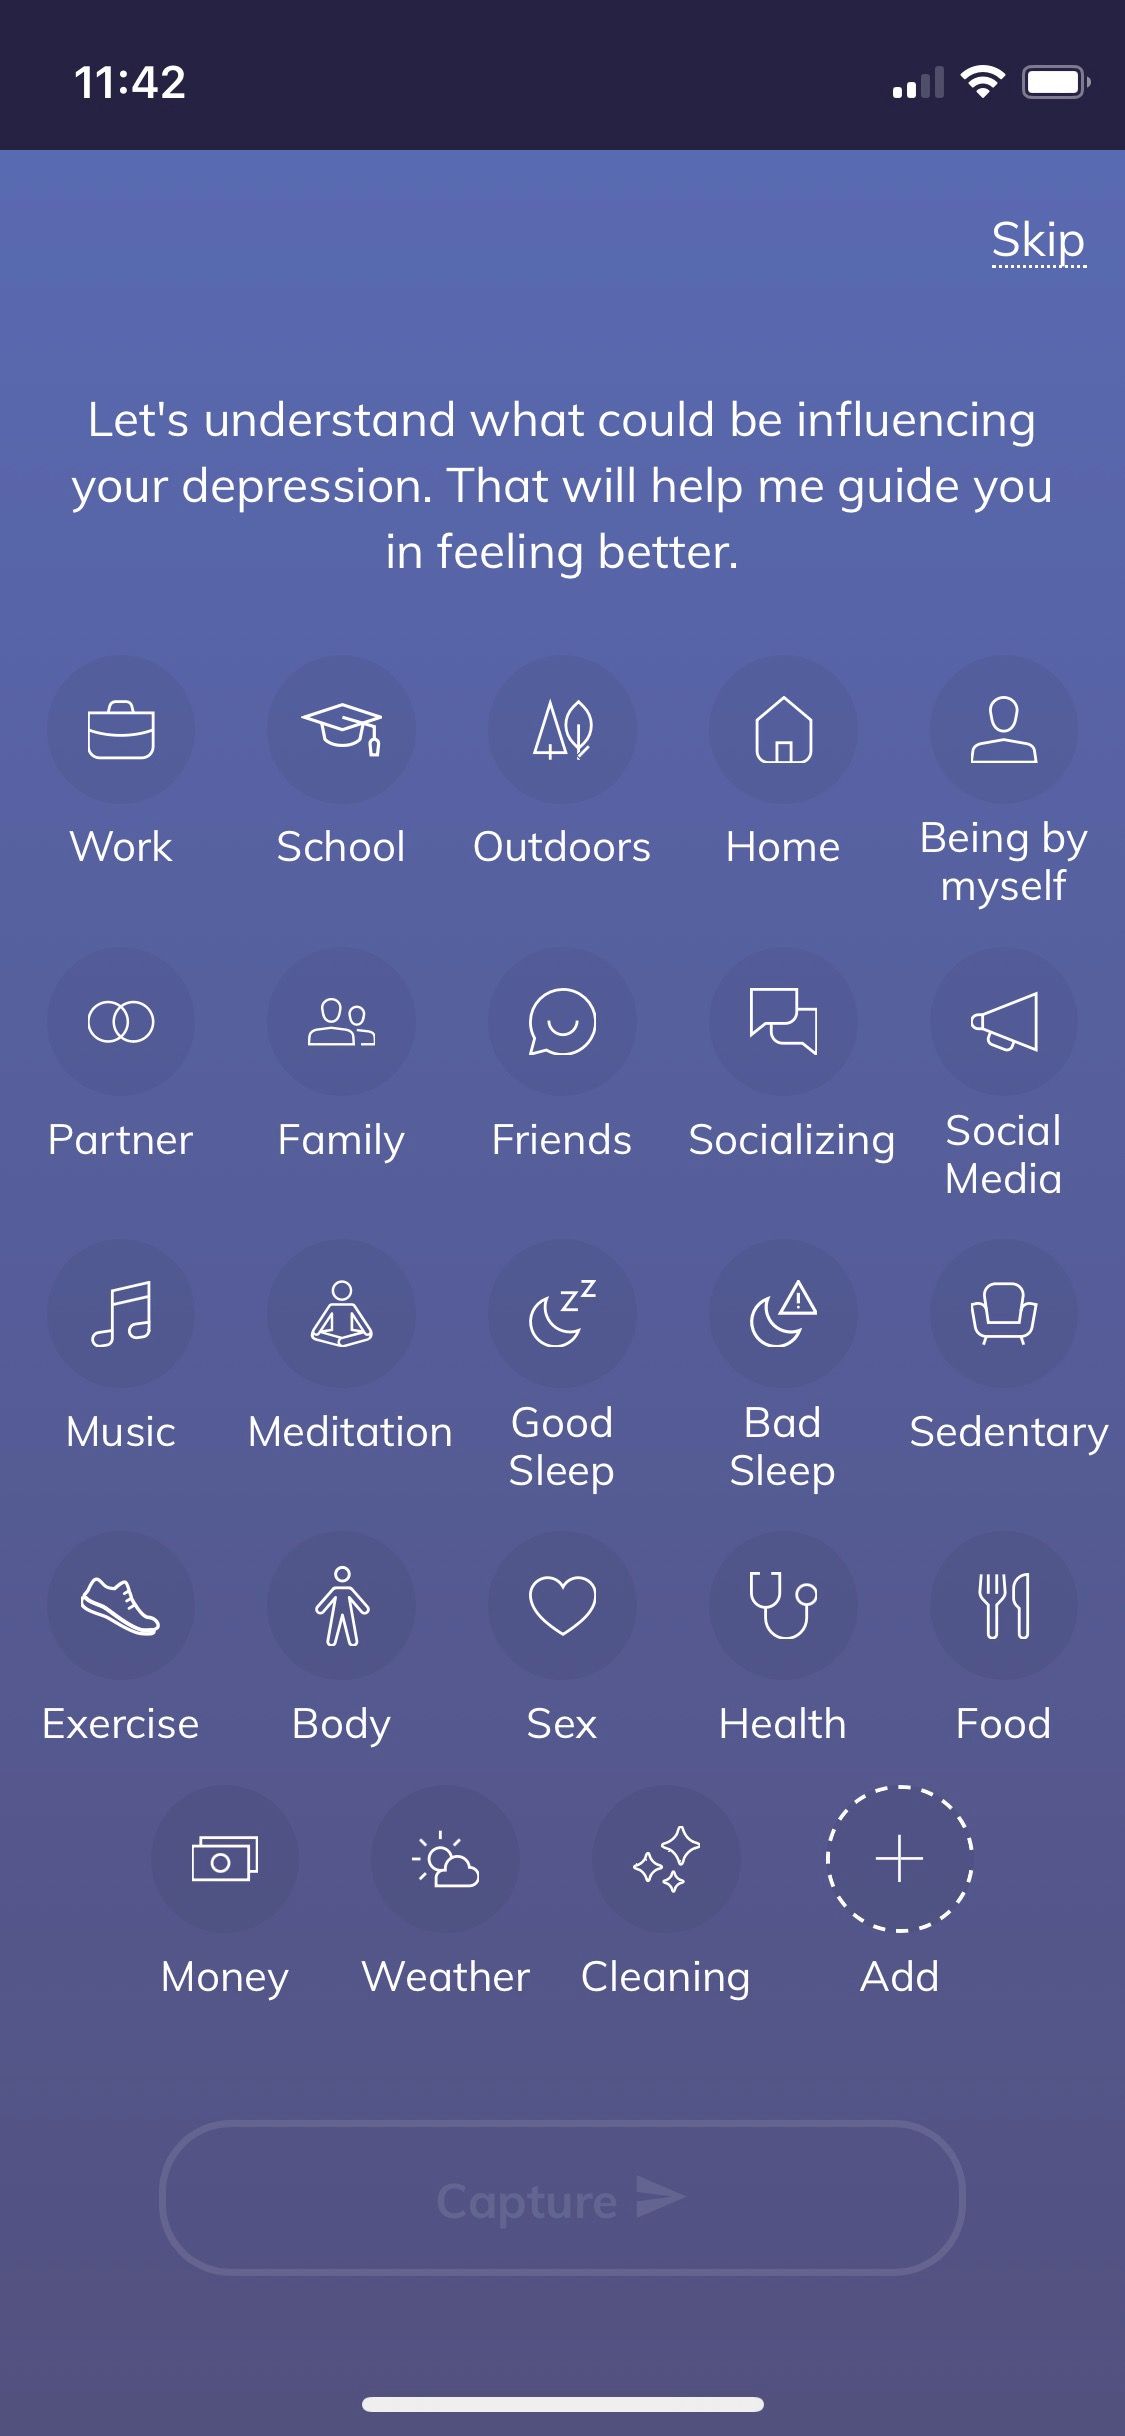 Screenshot of Youper app showing questionnaire